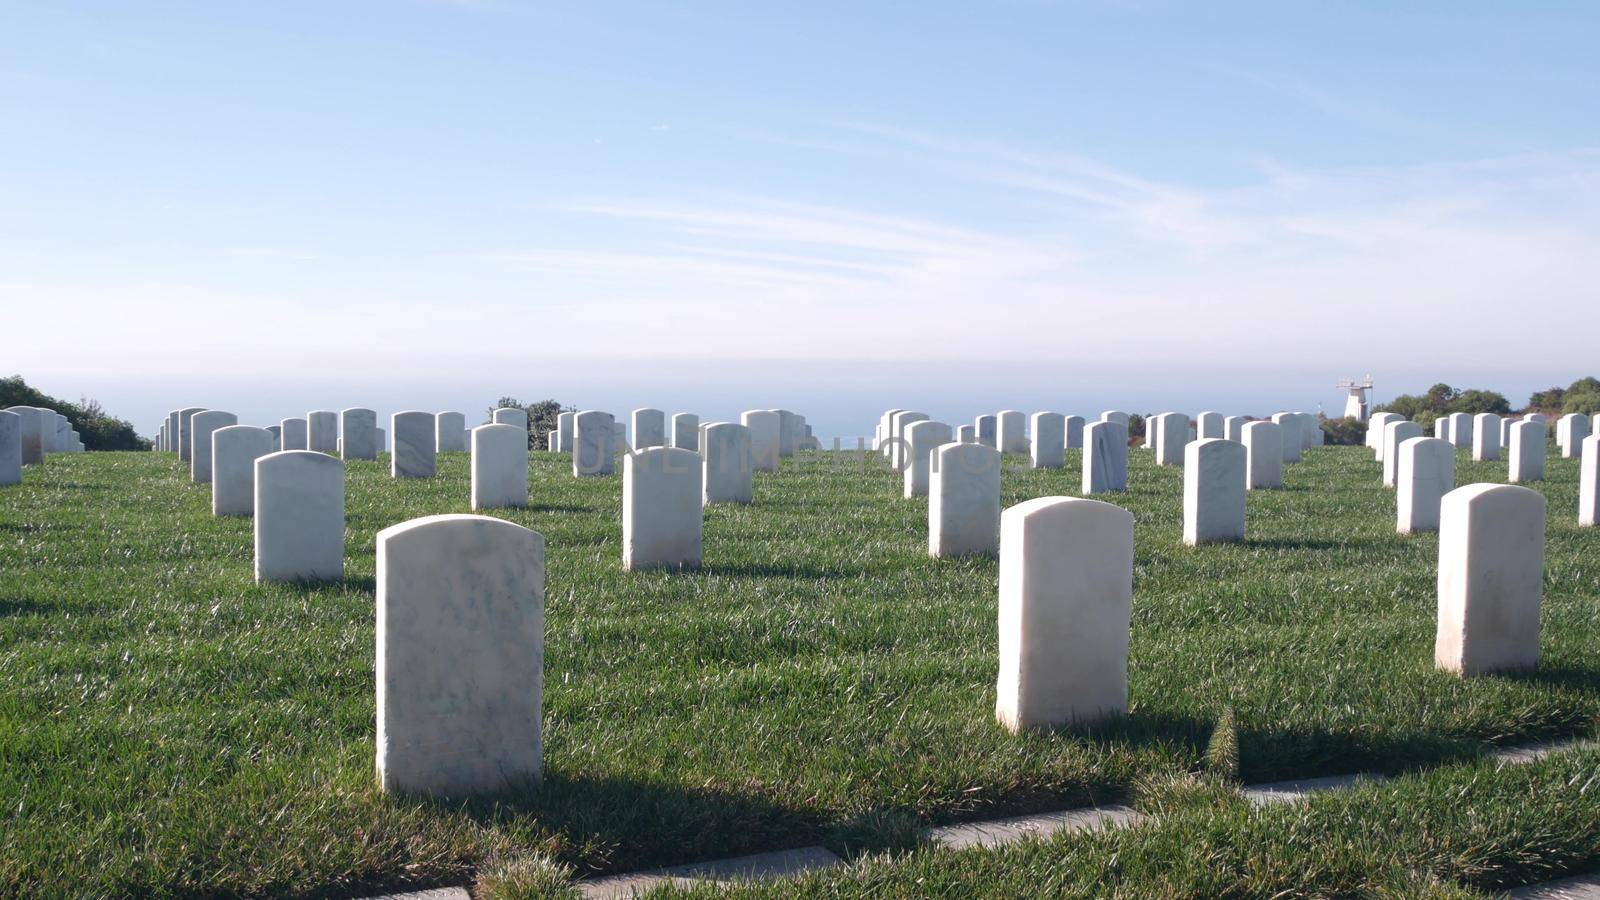 Tombstones on american military national memorial cemetery, graveyard in USA. Headstones or gravestones and green lawn grass. Respect and honor for armed forces soldiers. Veterans and Remembrance Day.